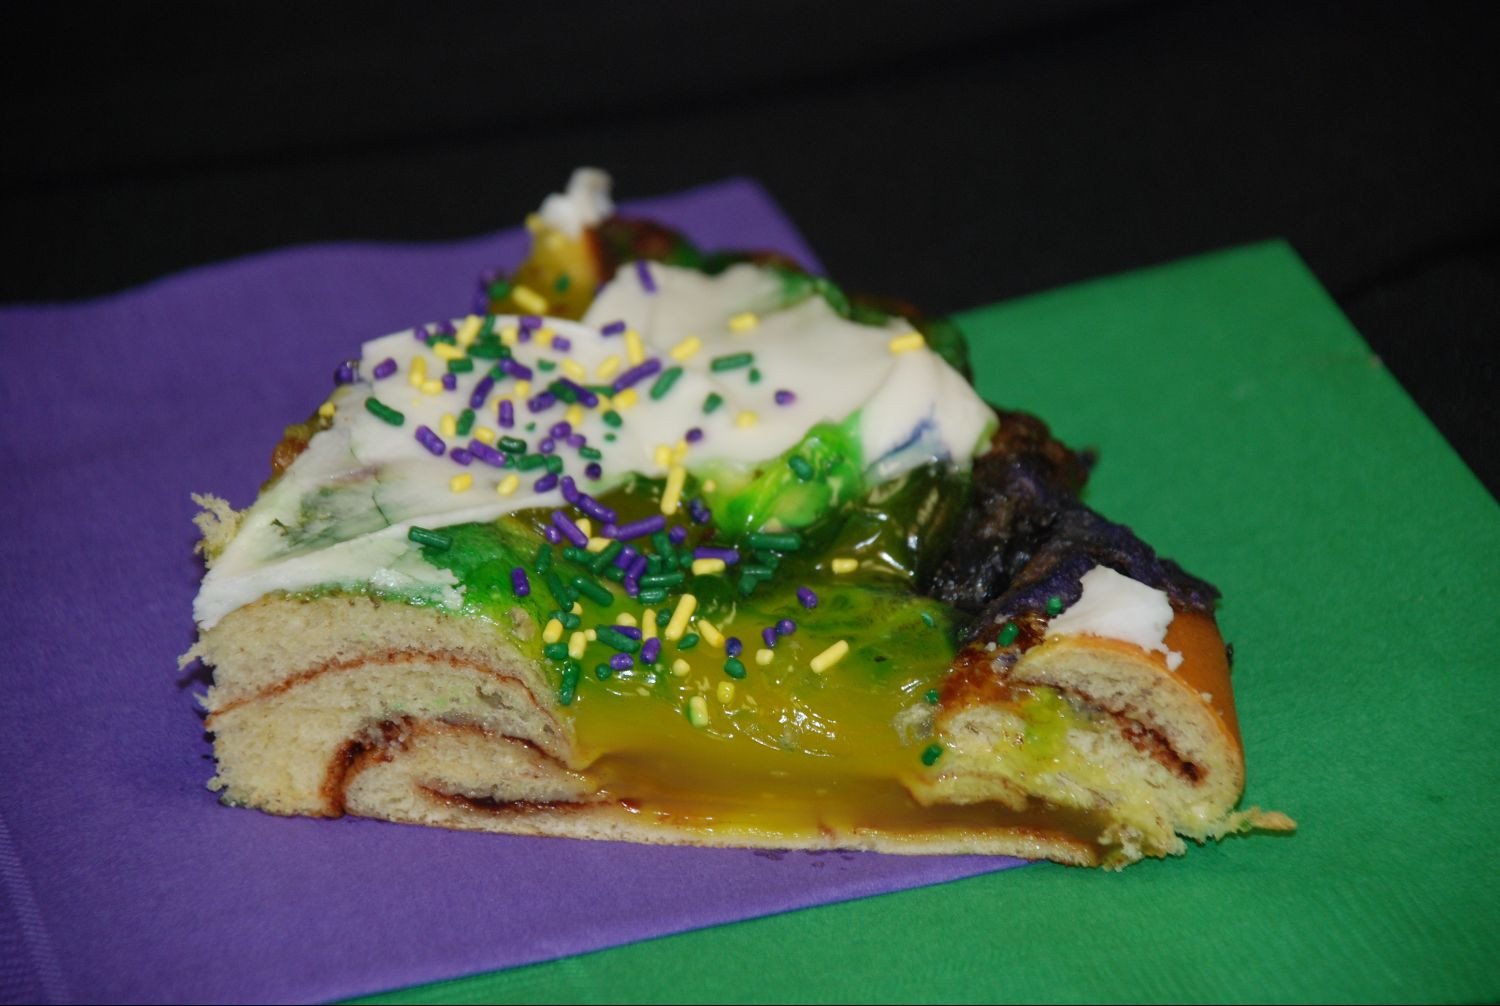 Flavors of King Cake